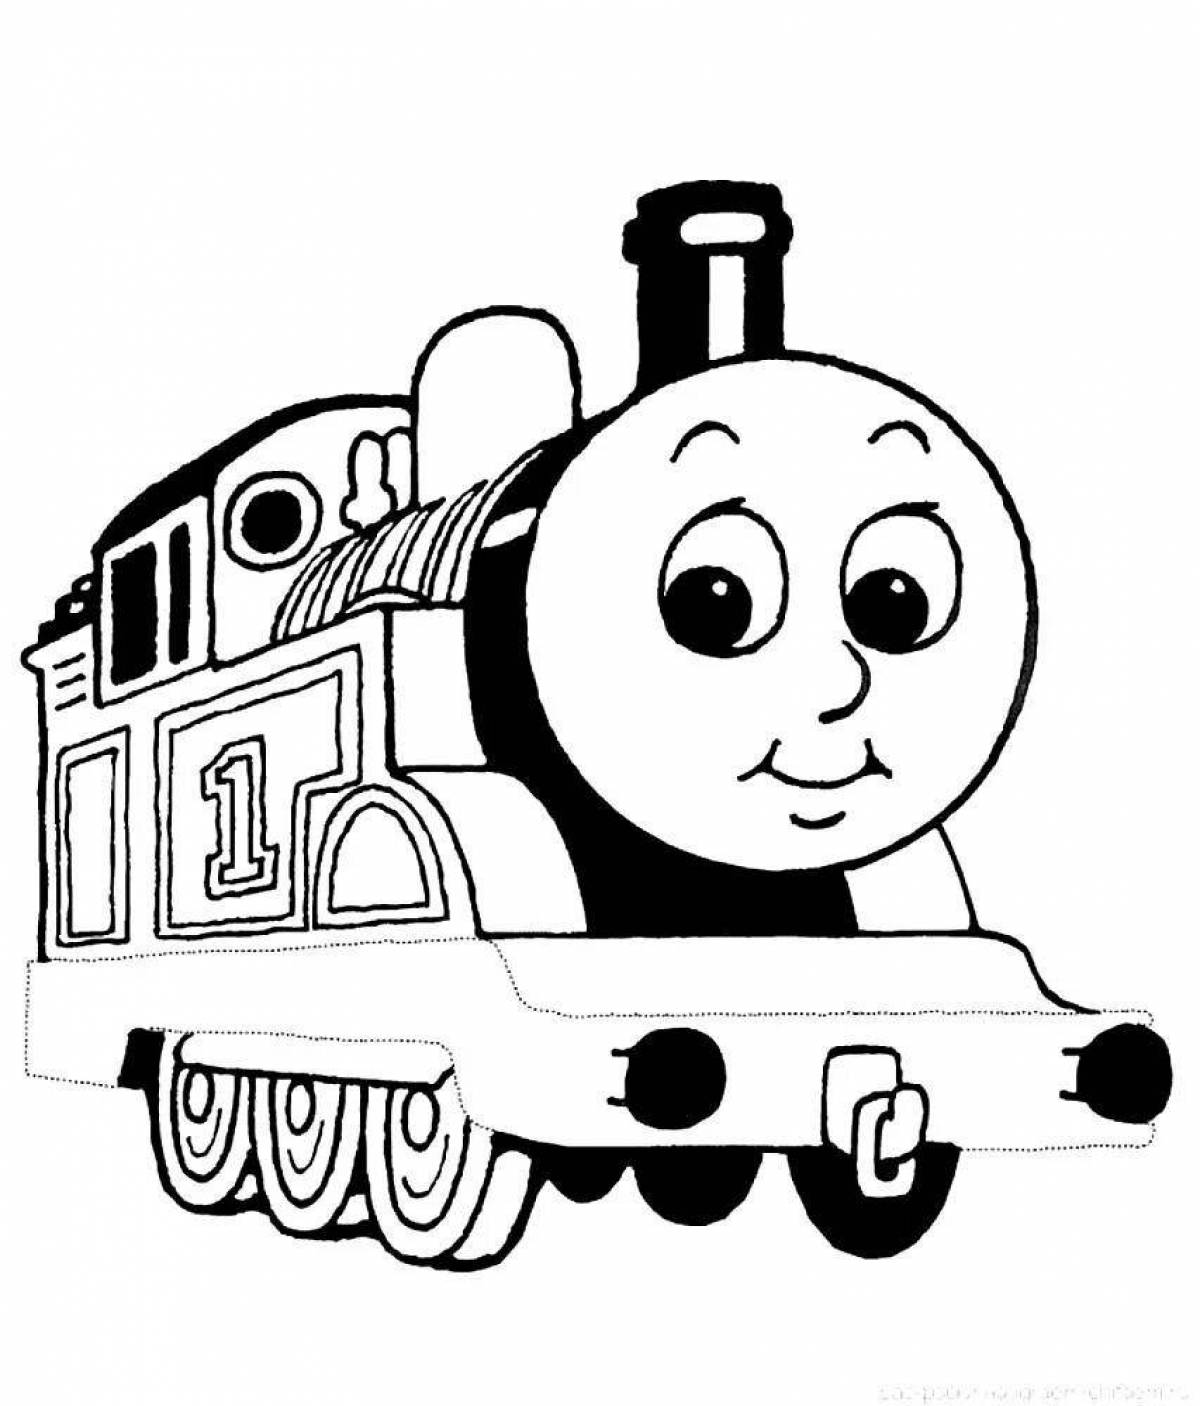 Thomas the Tank Engine Scary Coloring Page